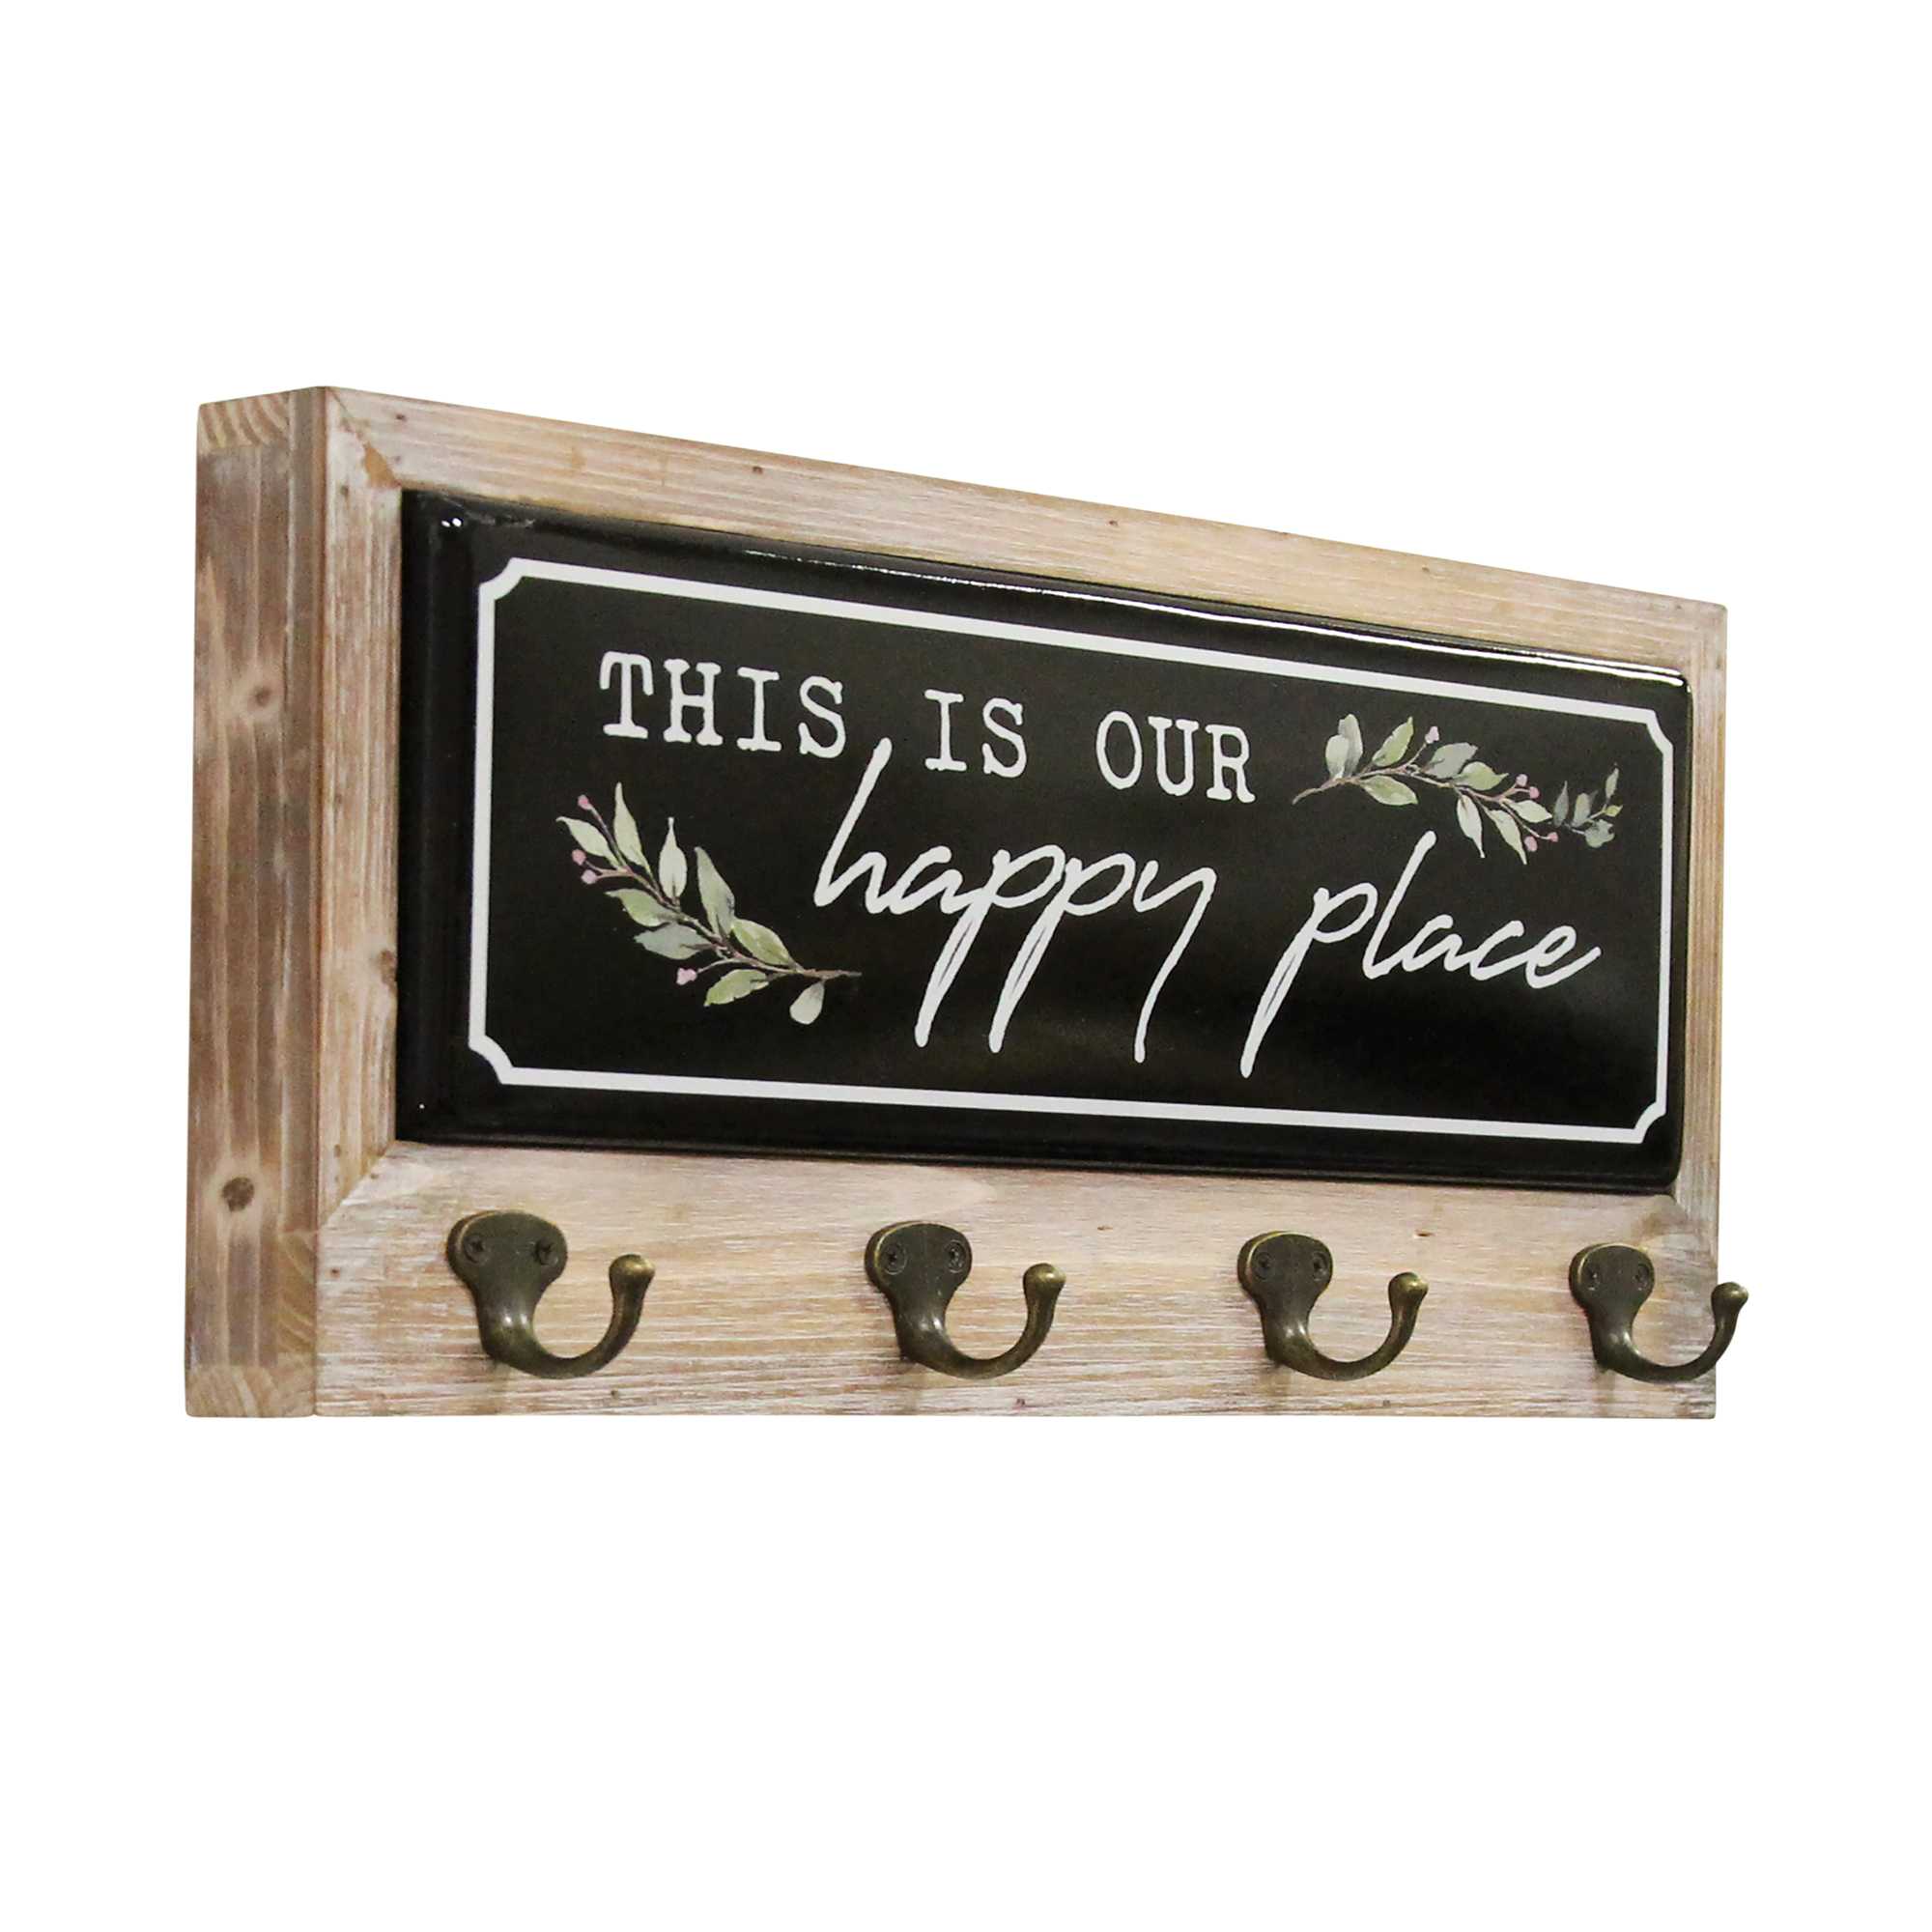 This is Our Happy Place Wood and Metal Coat Rack